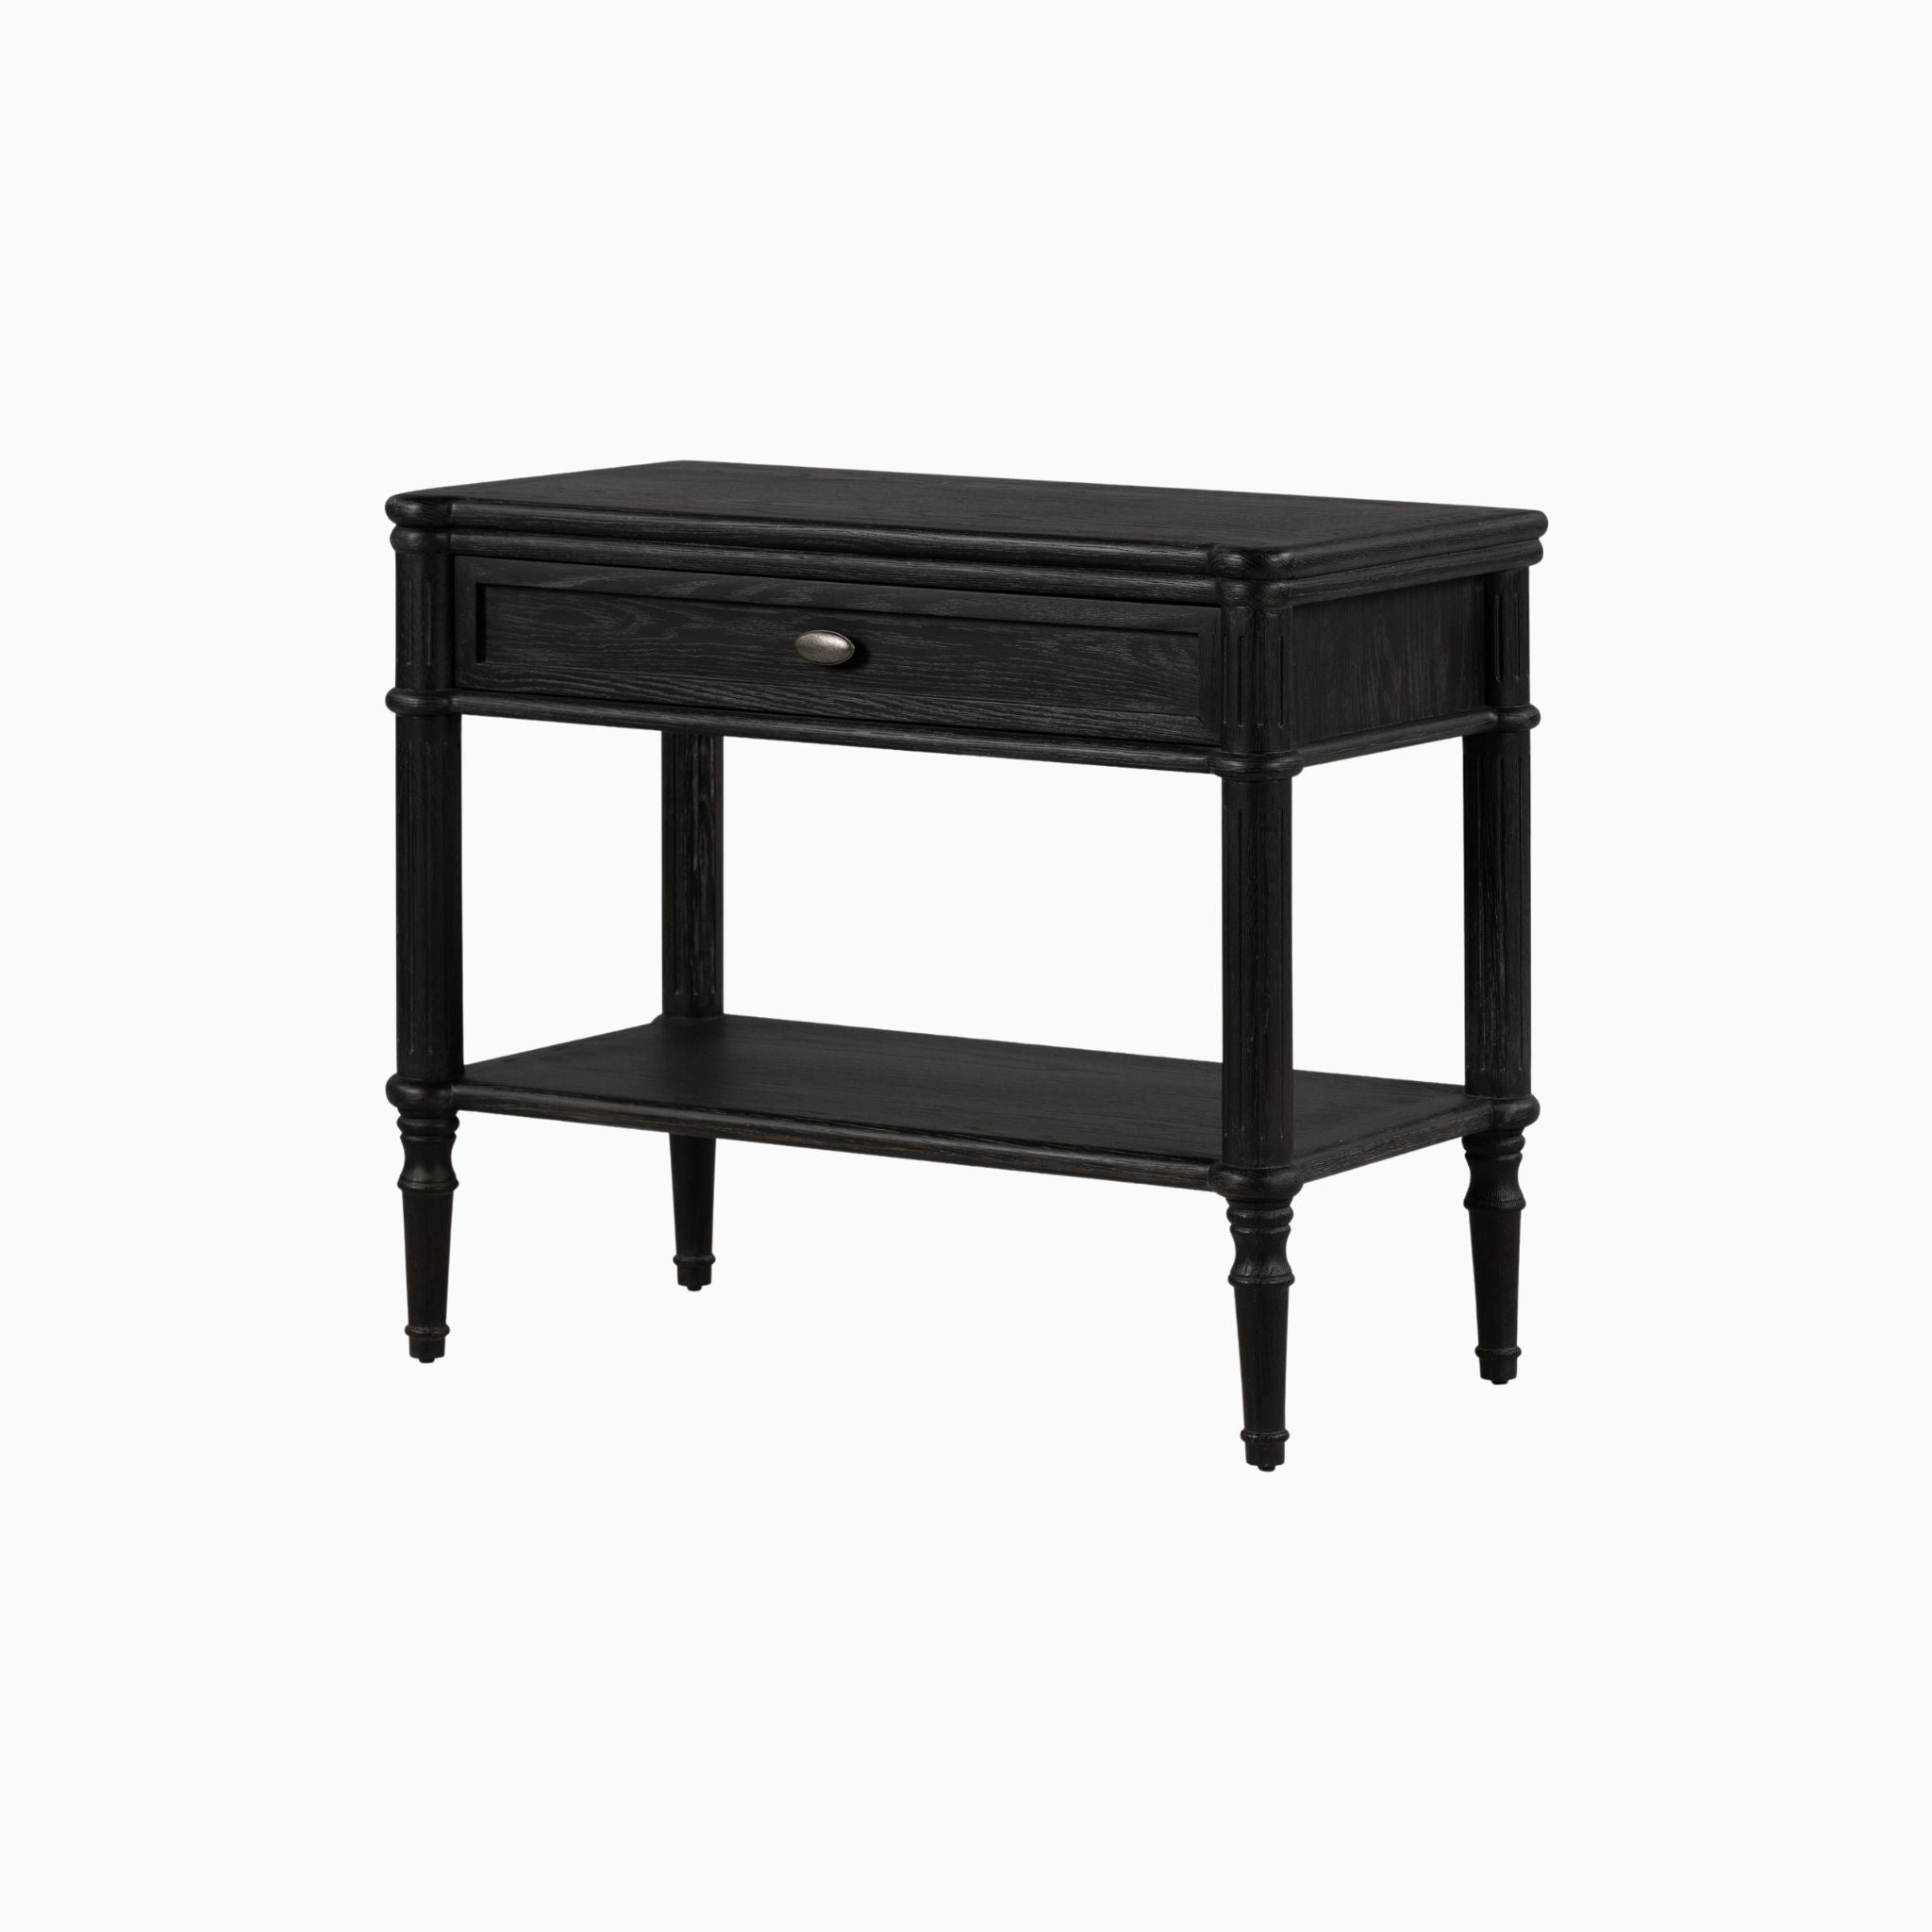 TOULOUSE NIGHTSTAND